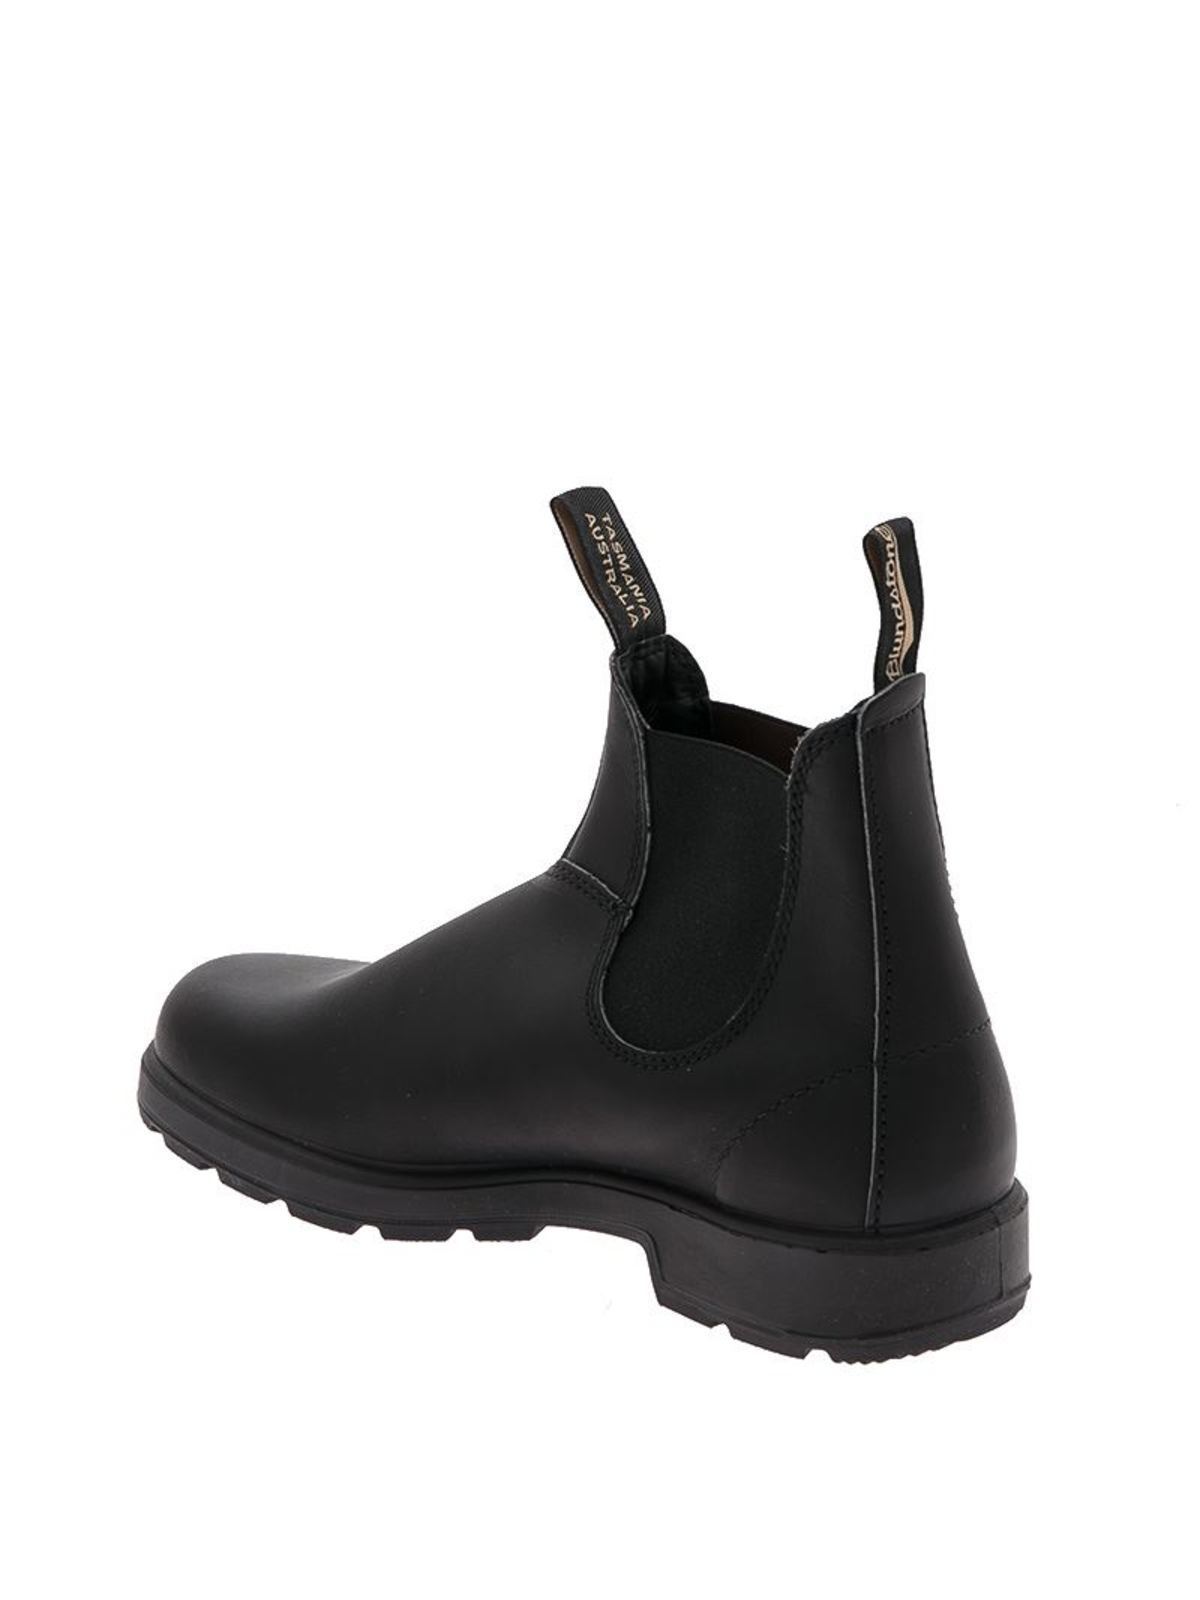 Boots Blundstone - Black Chelsea ankle 